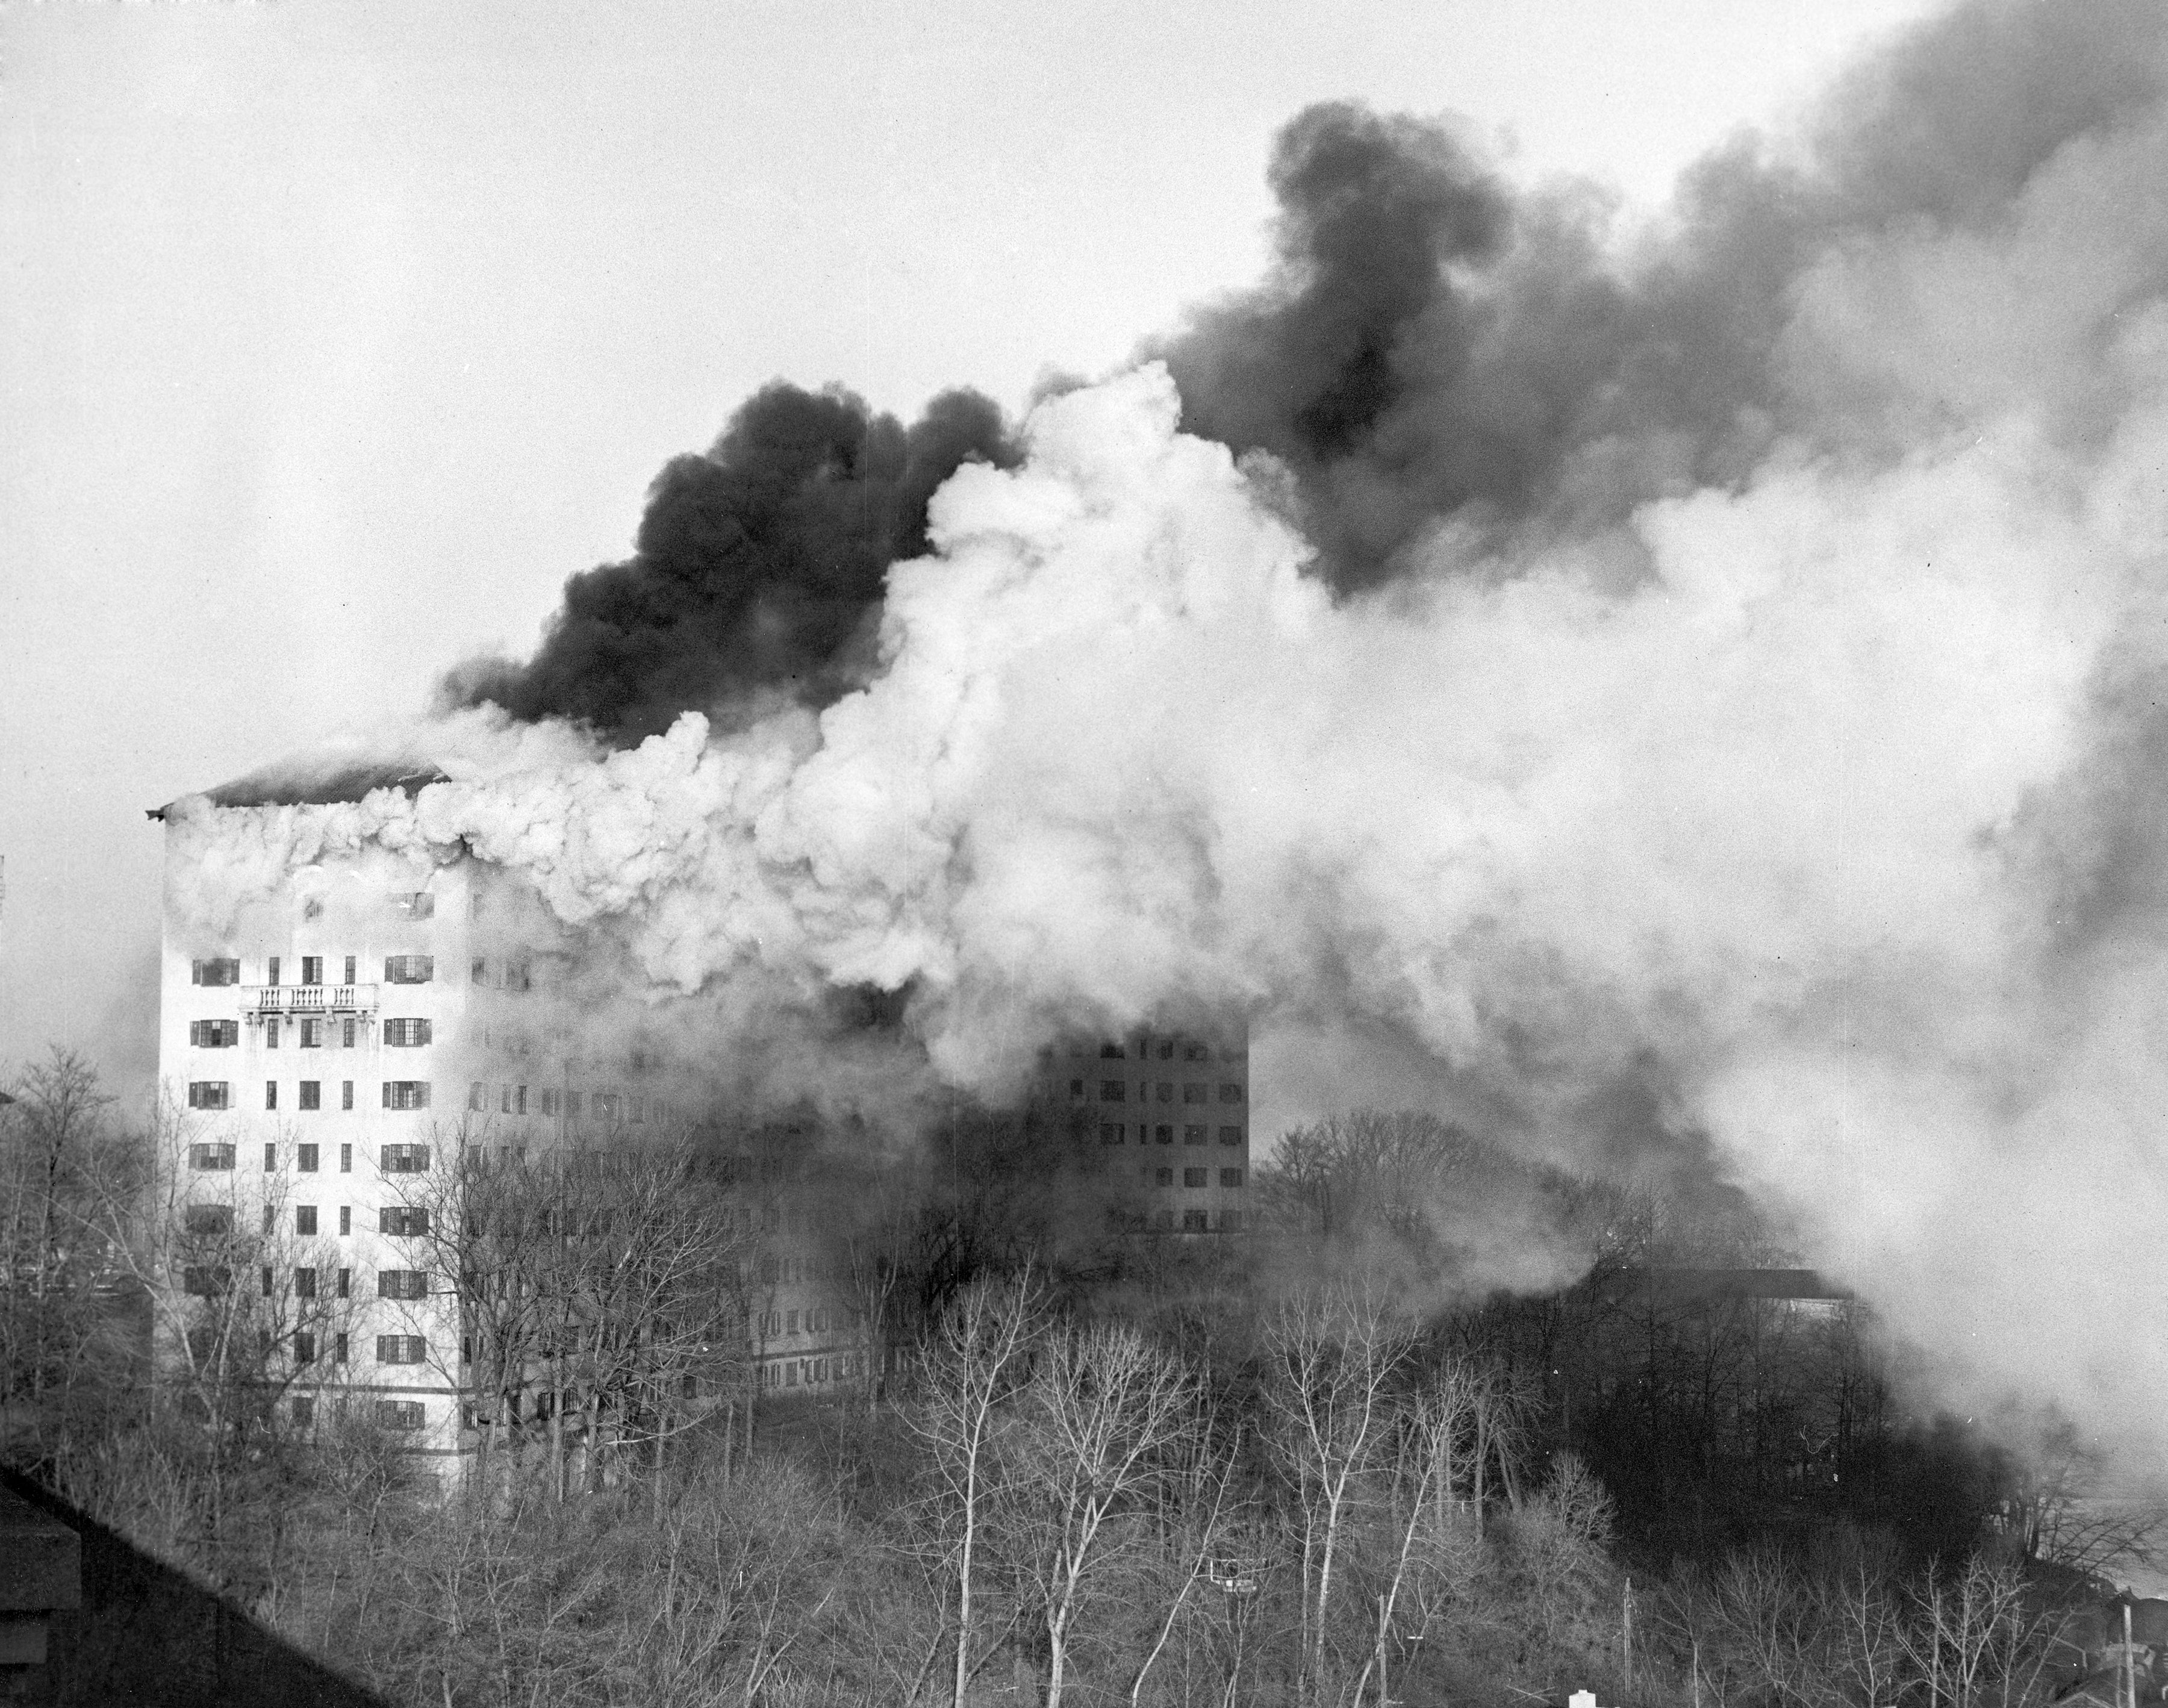 Smoke billows from the Westlake Hotel during the fire on 25 Jan. 1962.